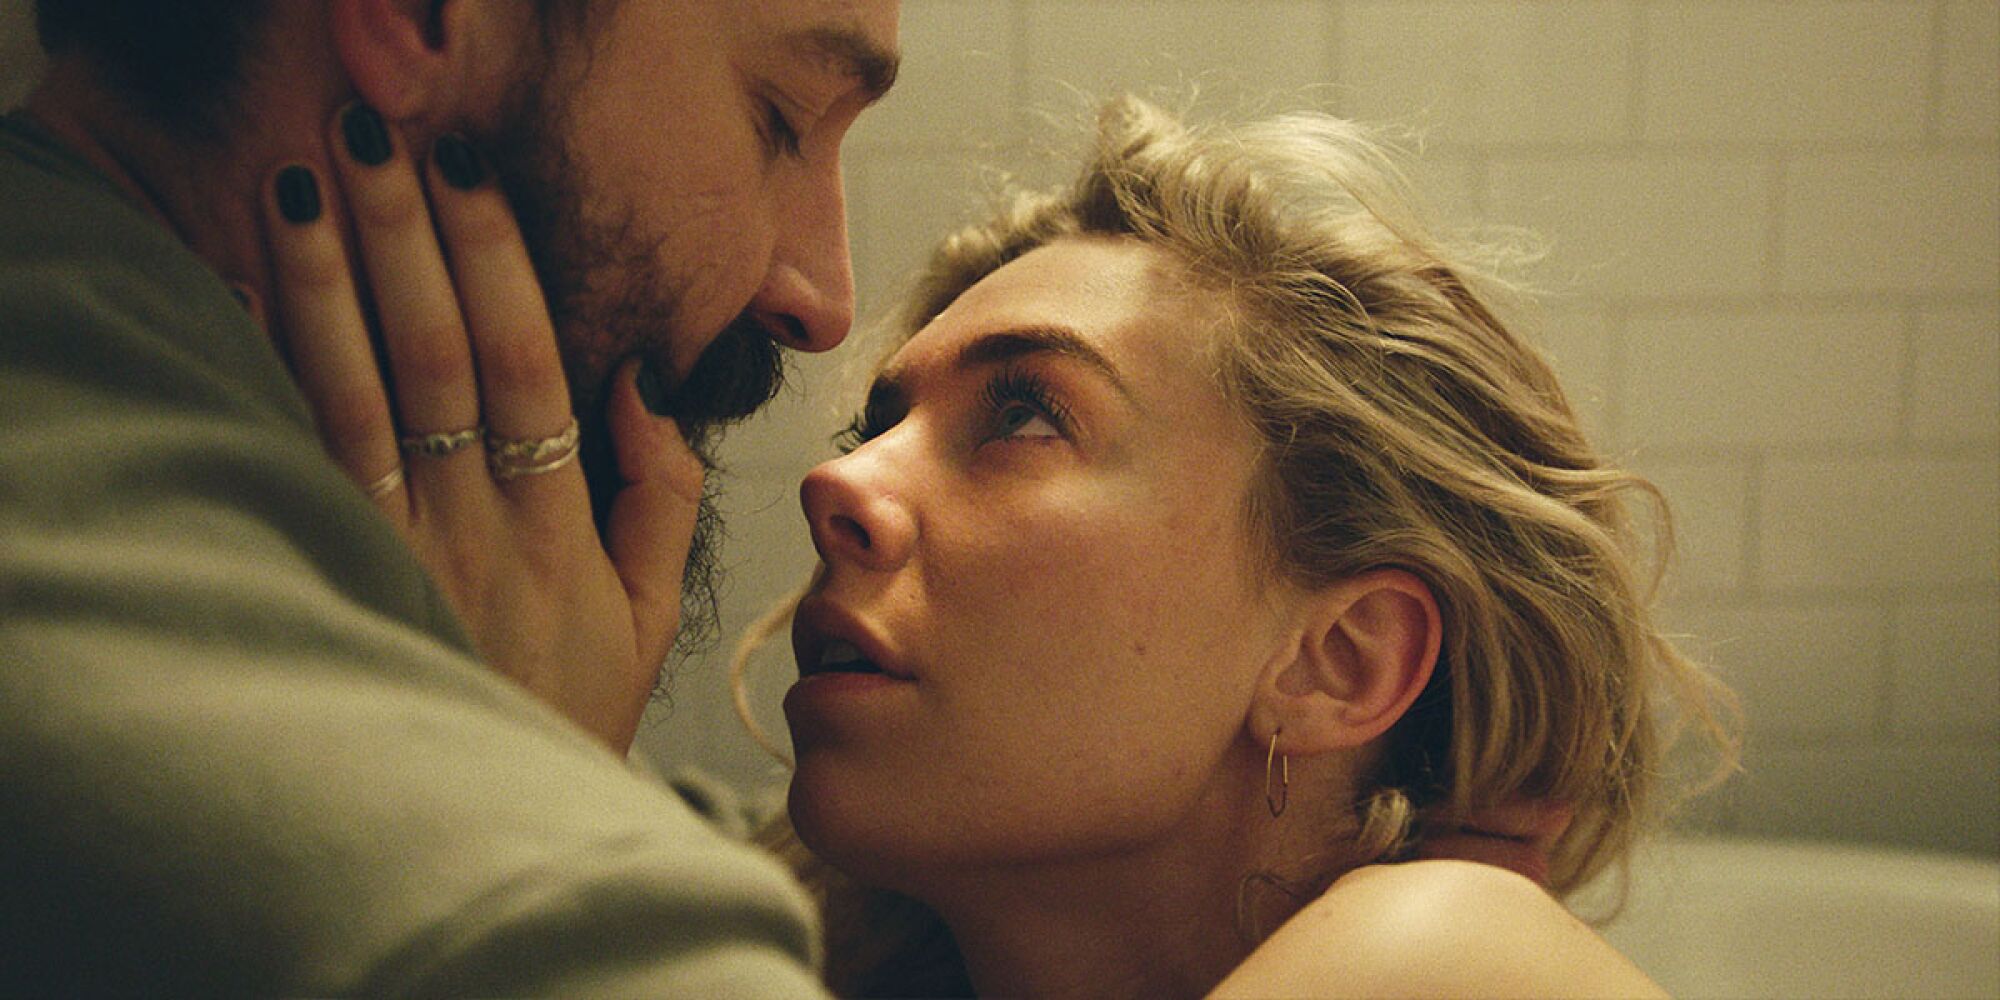 Shia LaBeouf and Vanessa Kirby in "Pieces of a Woman," coming to Netflix on Jan. 7, 2021.